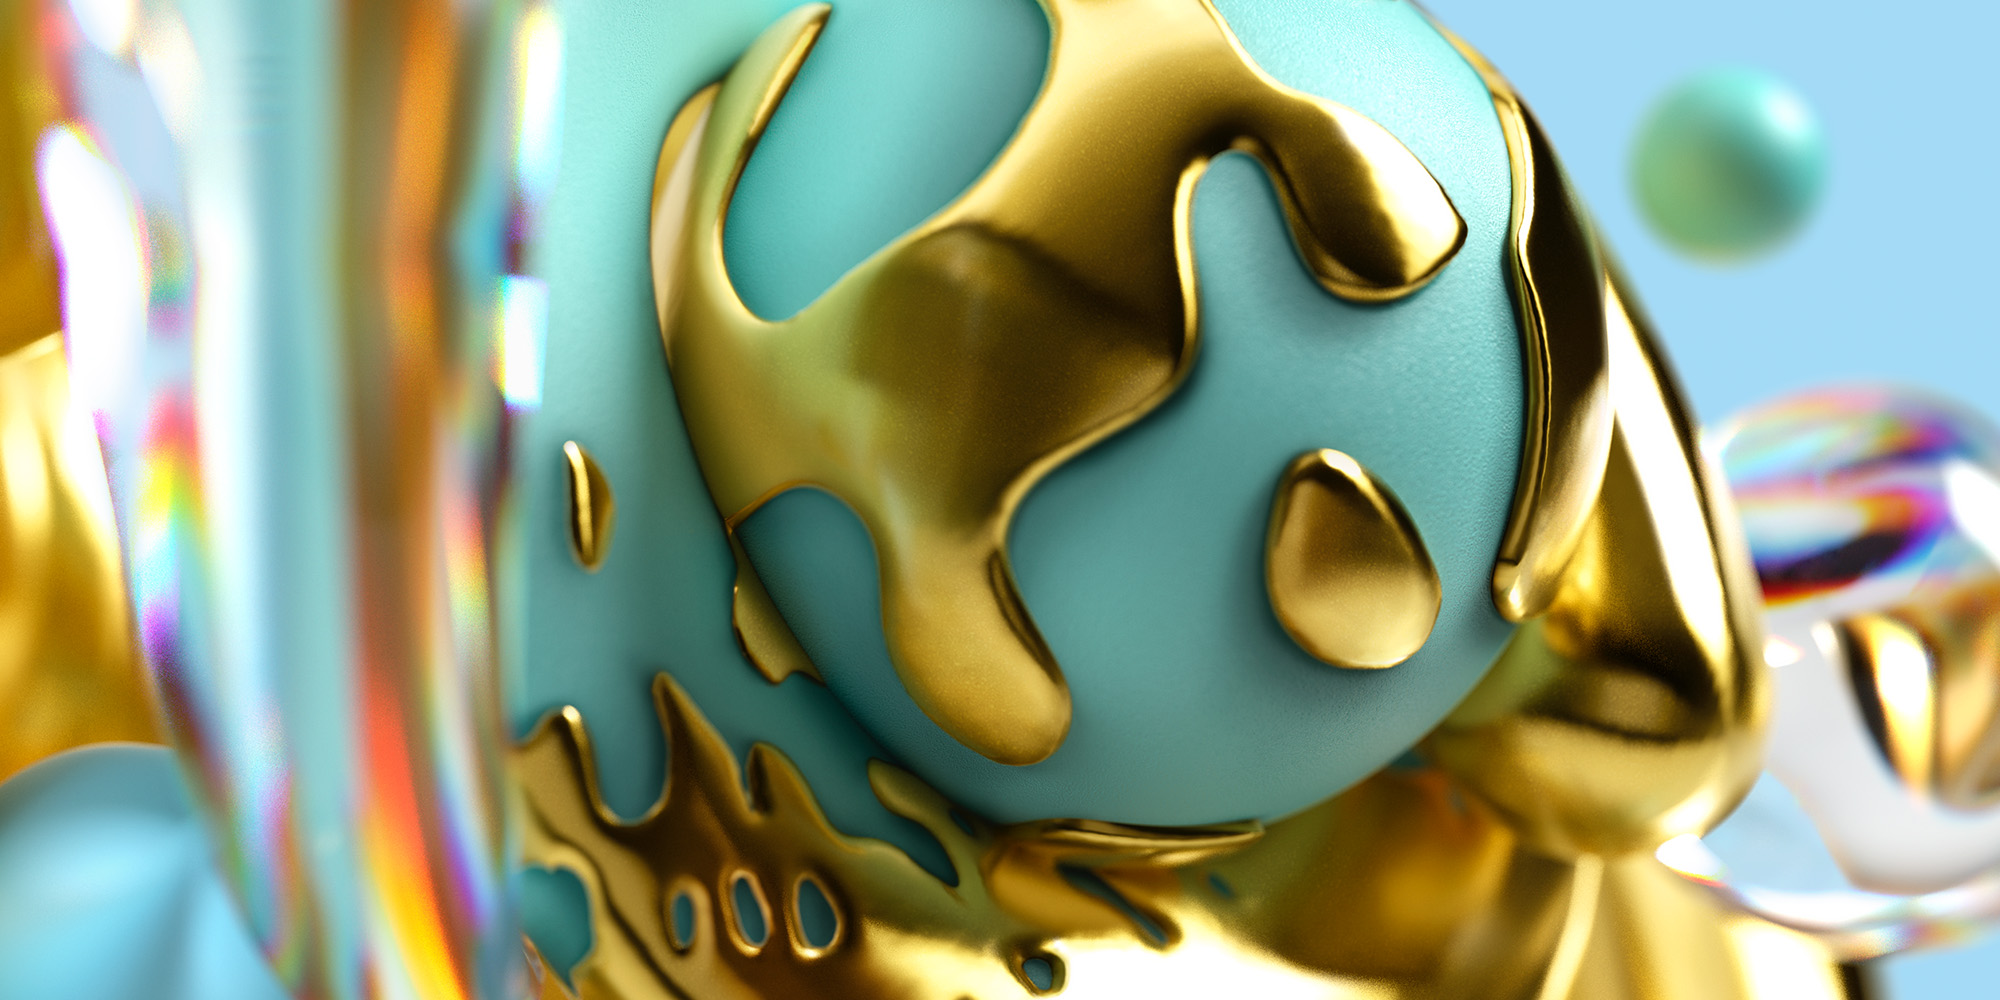 teal and gold ball hero image